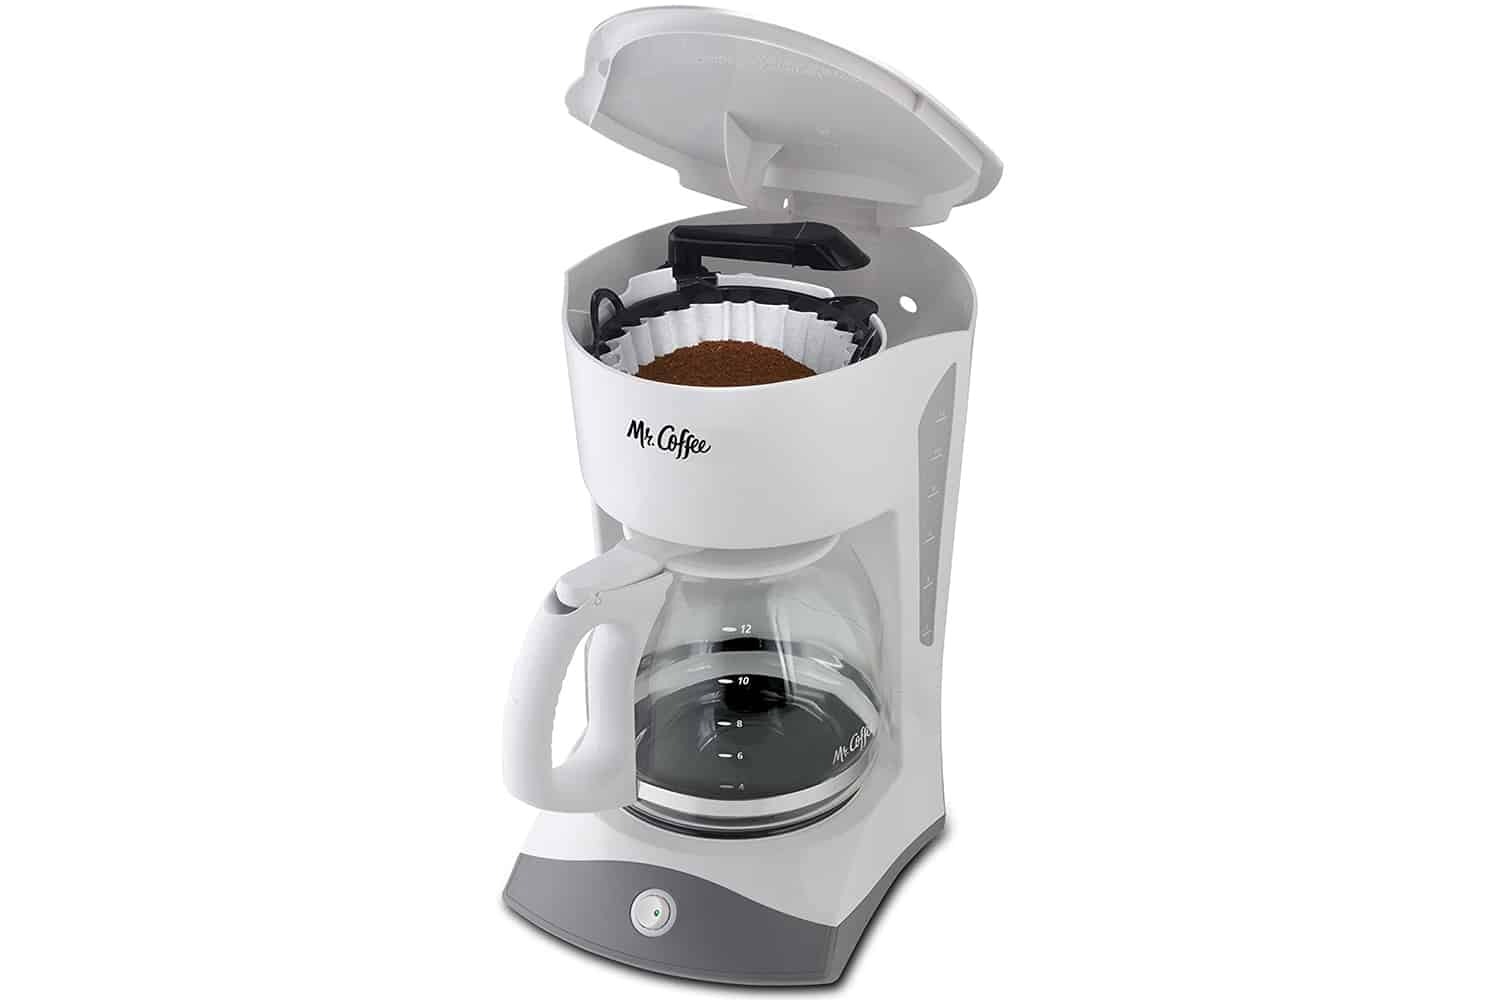 Mr. Coffee 12-Cup Programmable Coffeemaker Review 